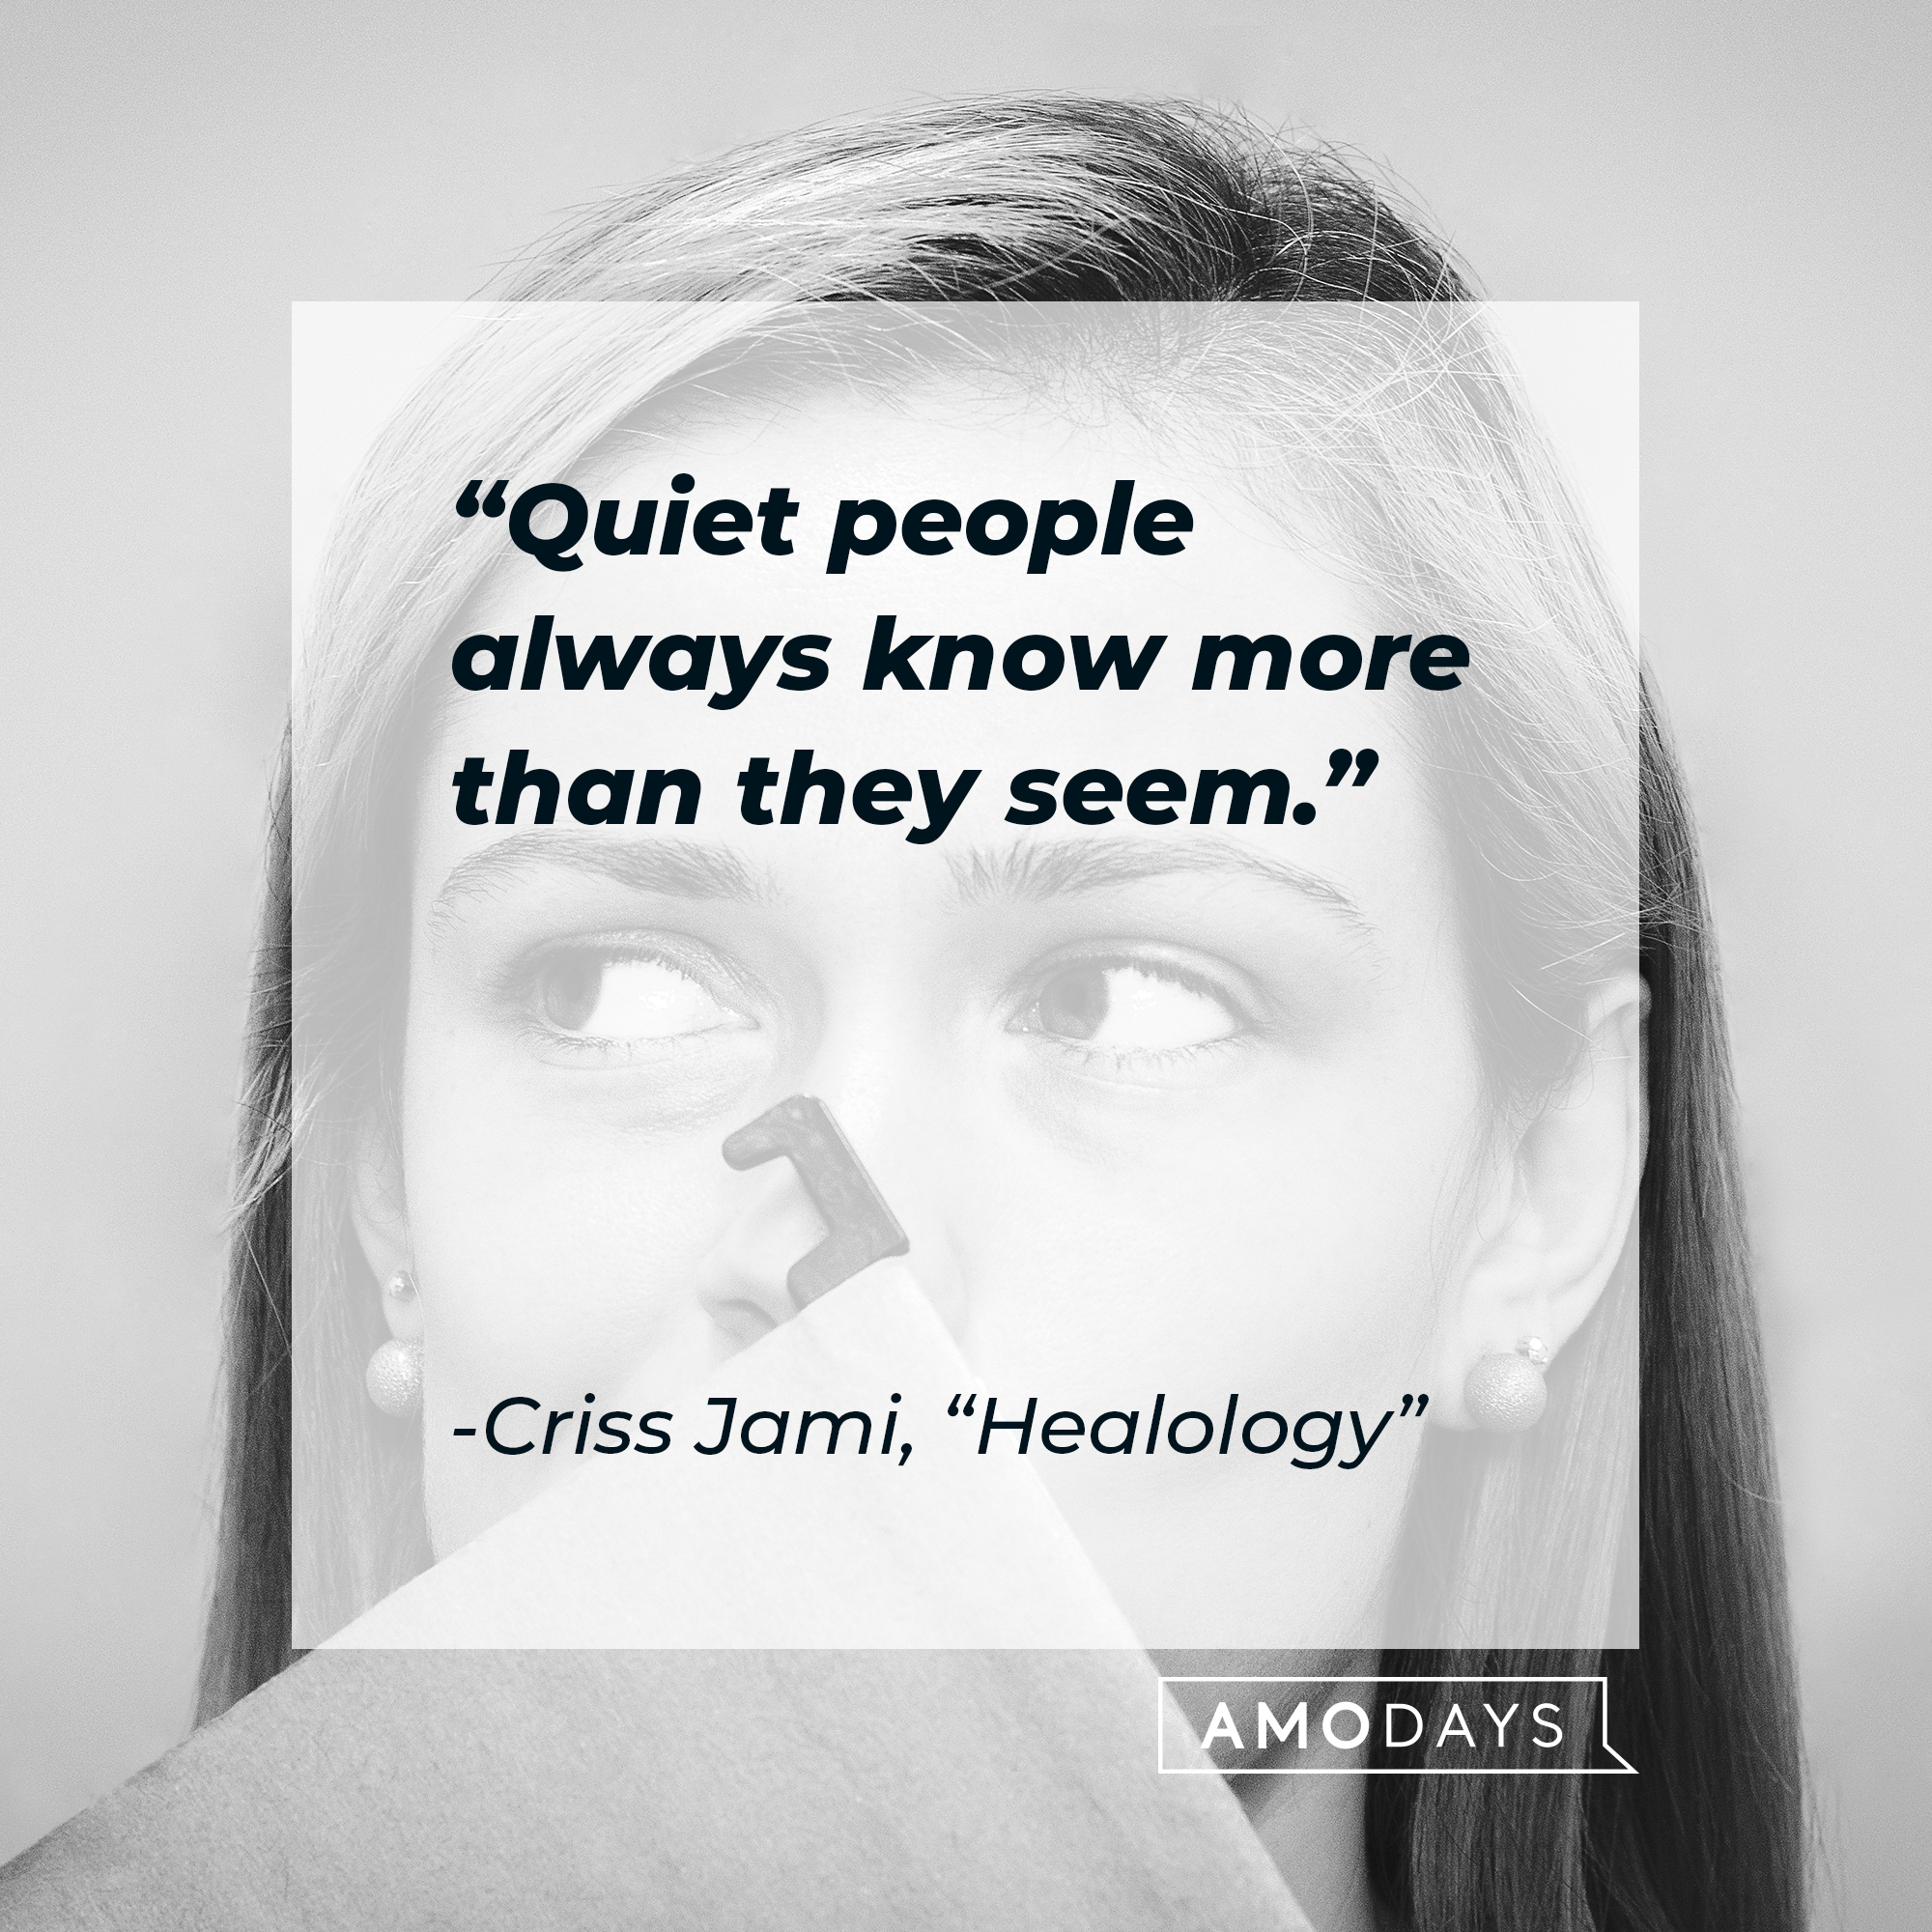 Criss Jami's quote: “Quiet people always know more than they seem.” | Image: AmoDays